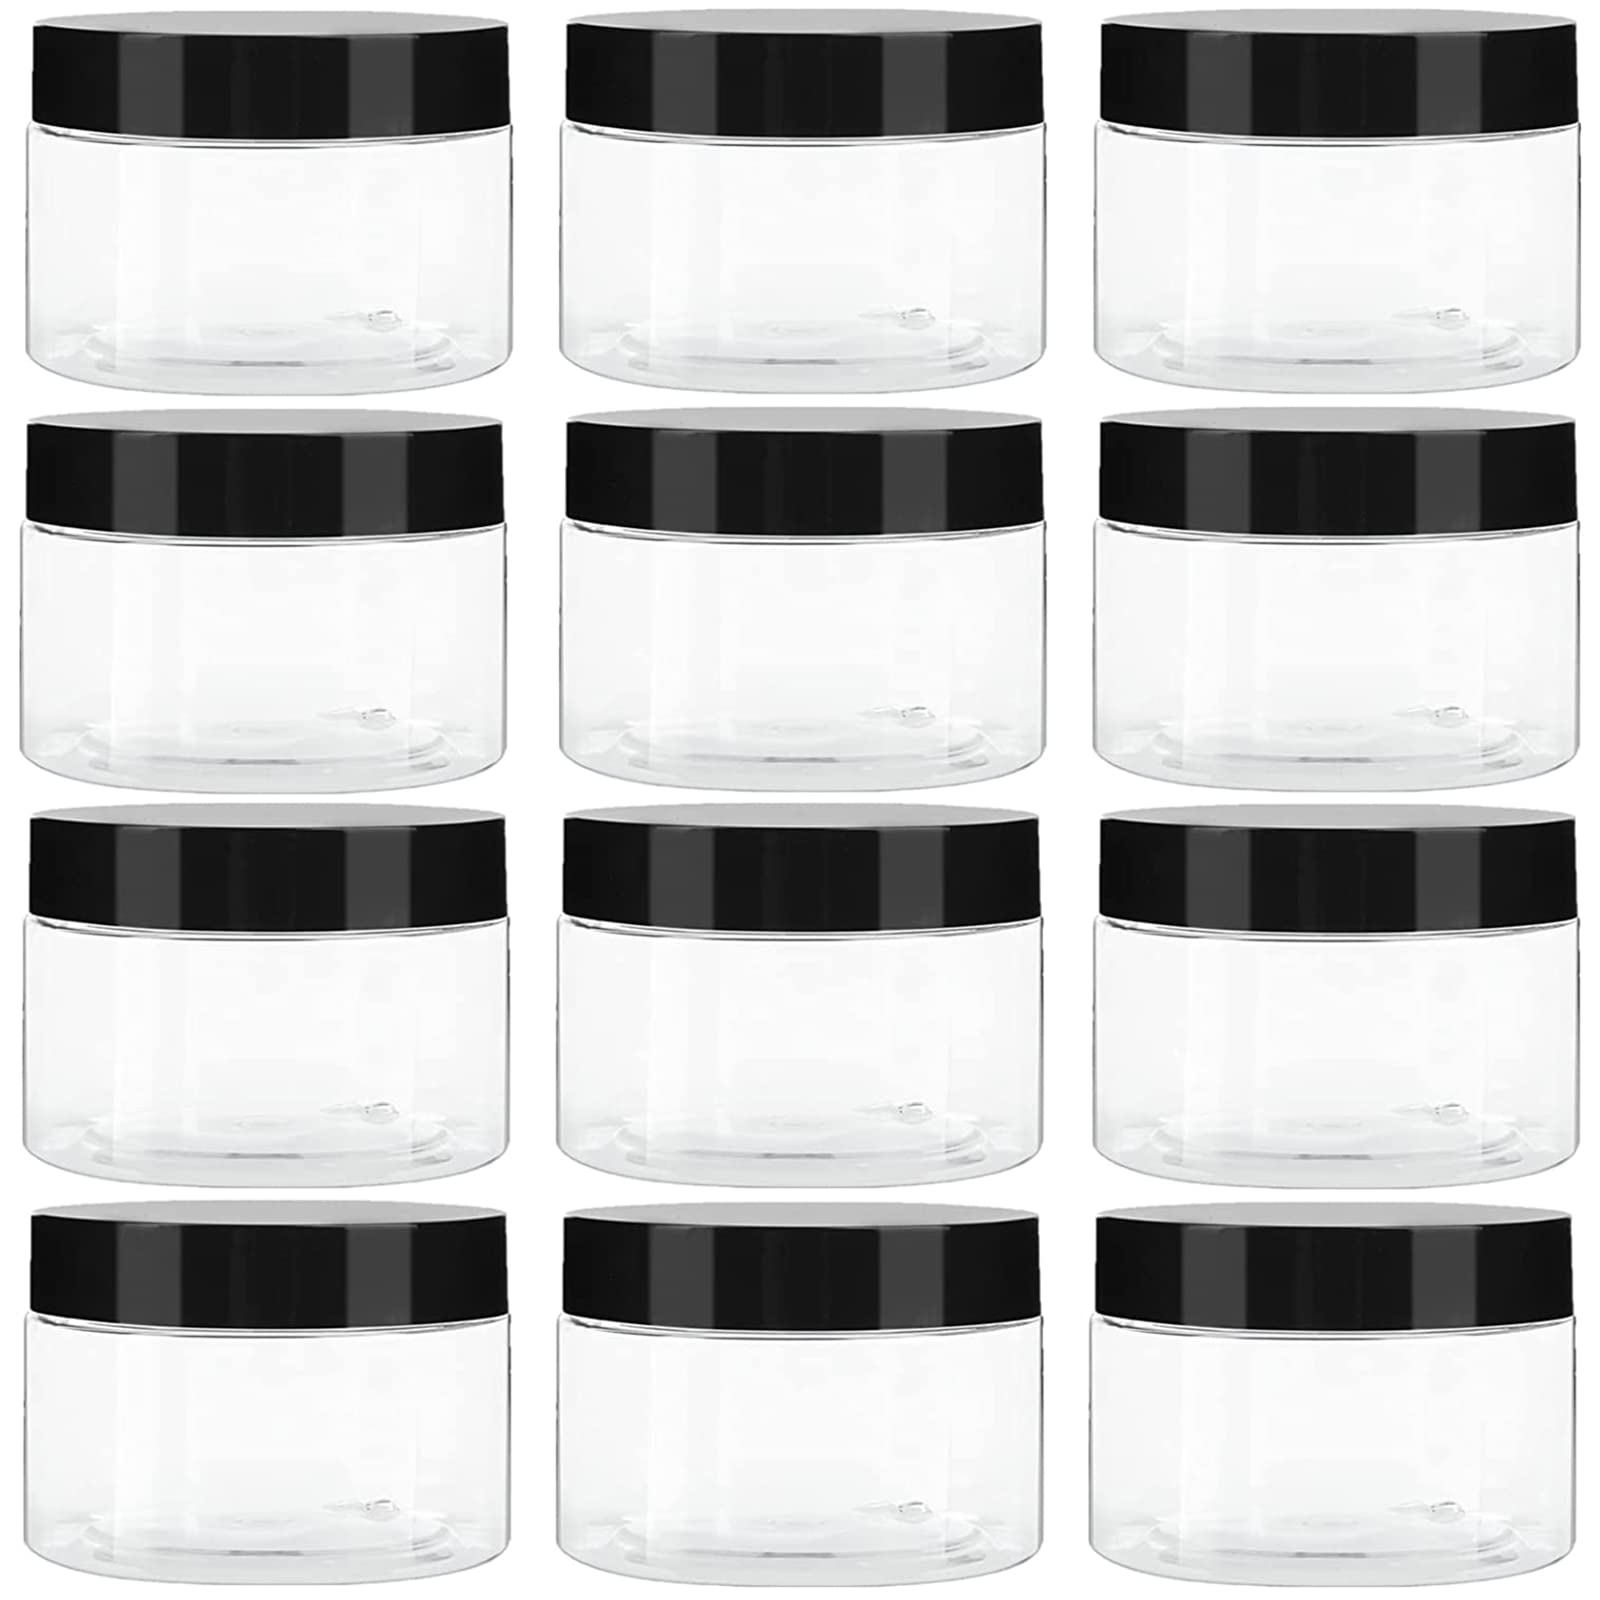 4 Oz Clear Plastic Container With Clear or White Lid 